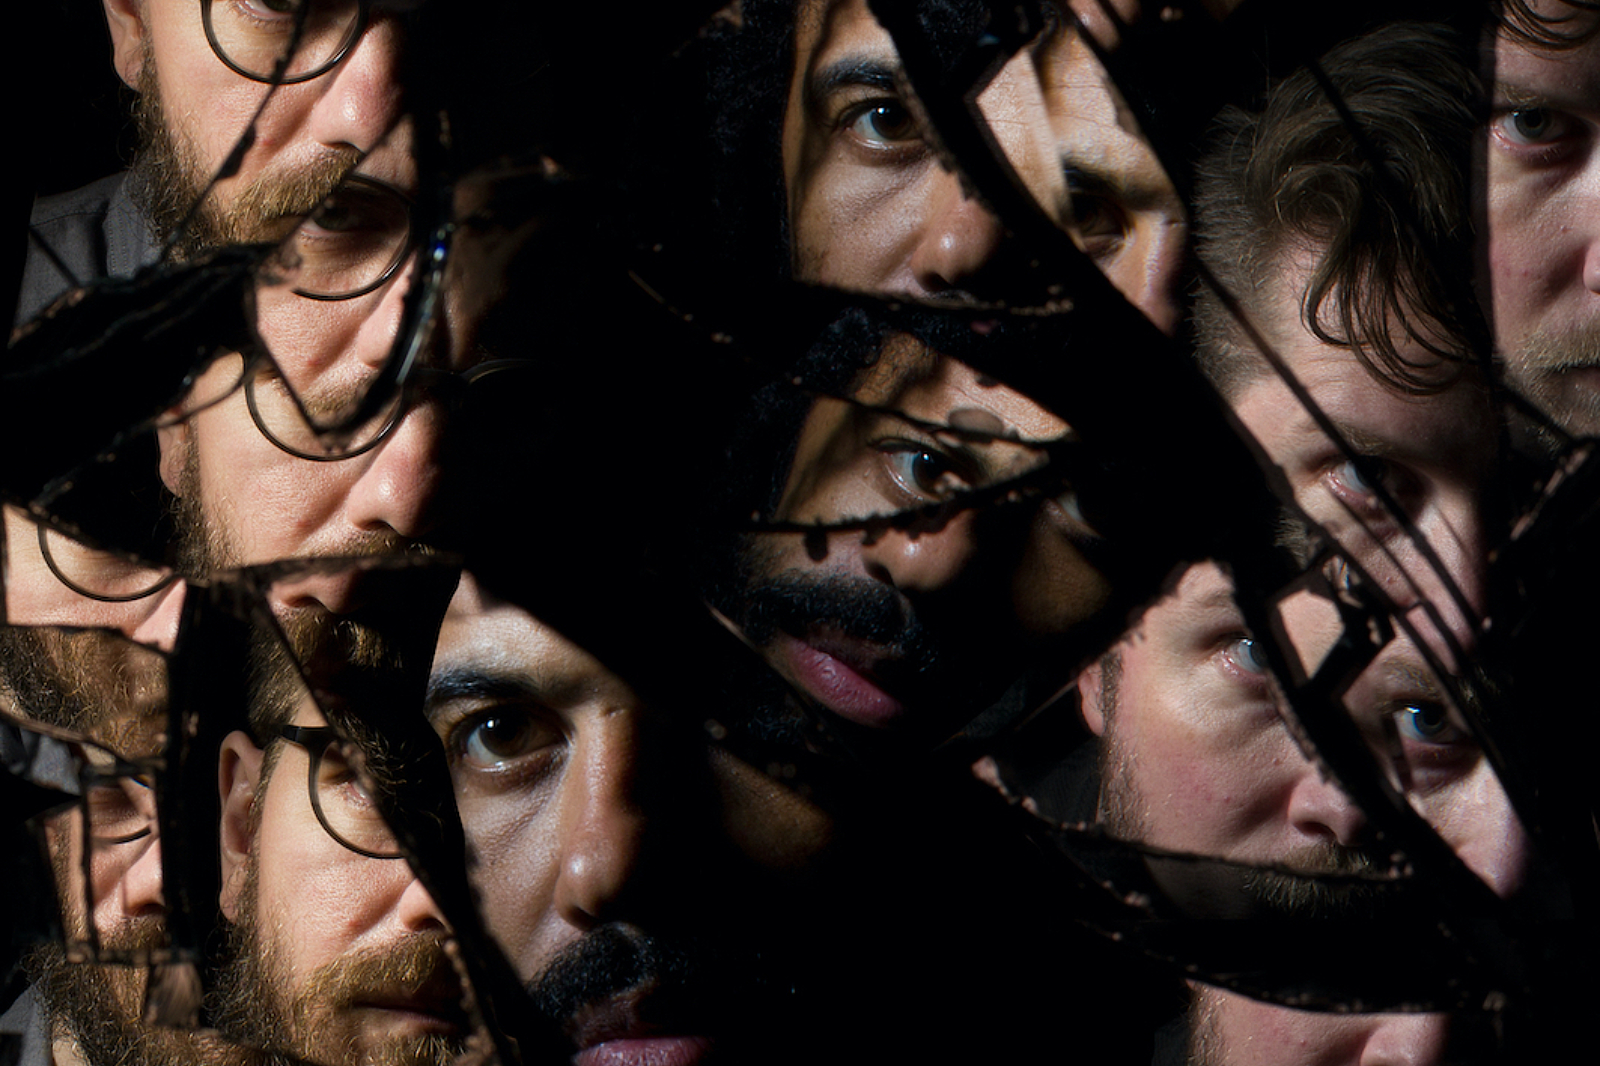 Clipping share 'Visions of Bodies Being Burned: Enlacing & Pain Everyday' video